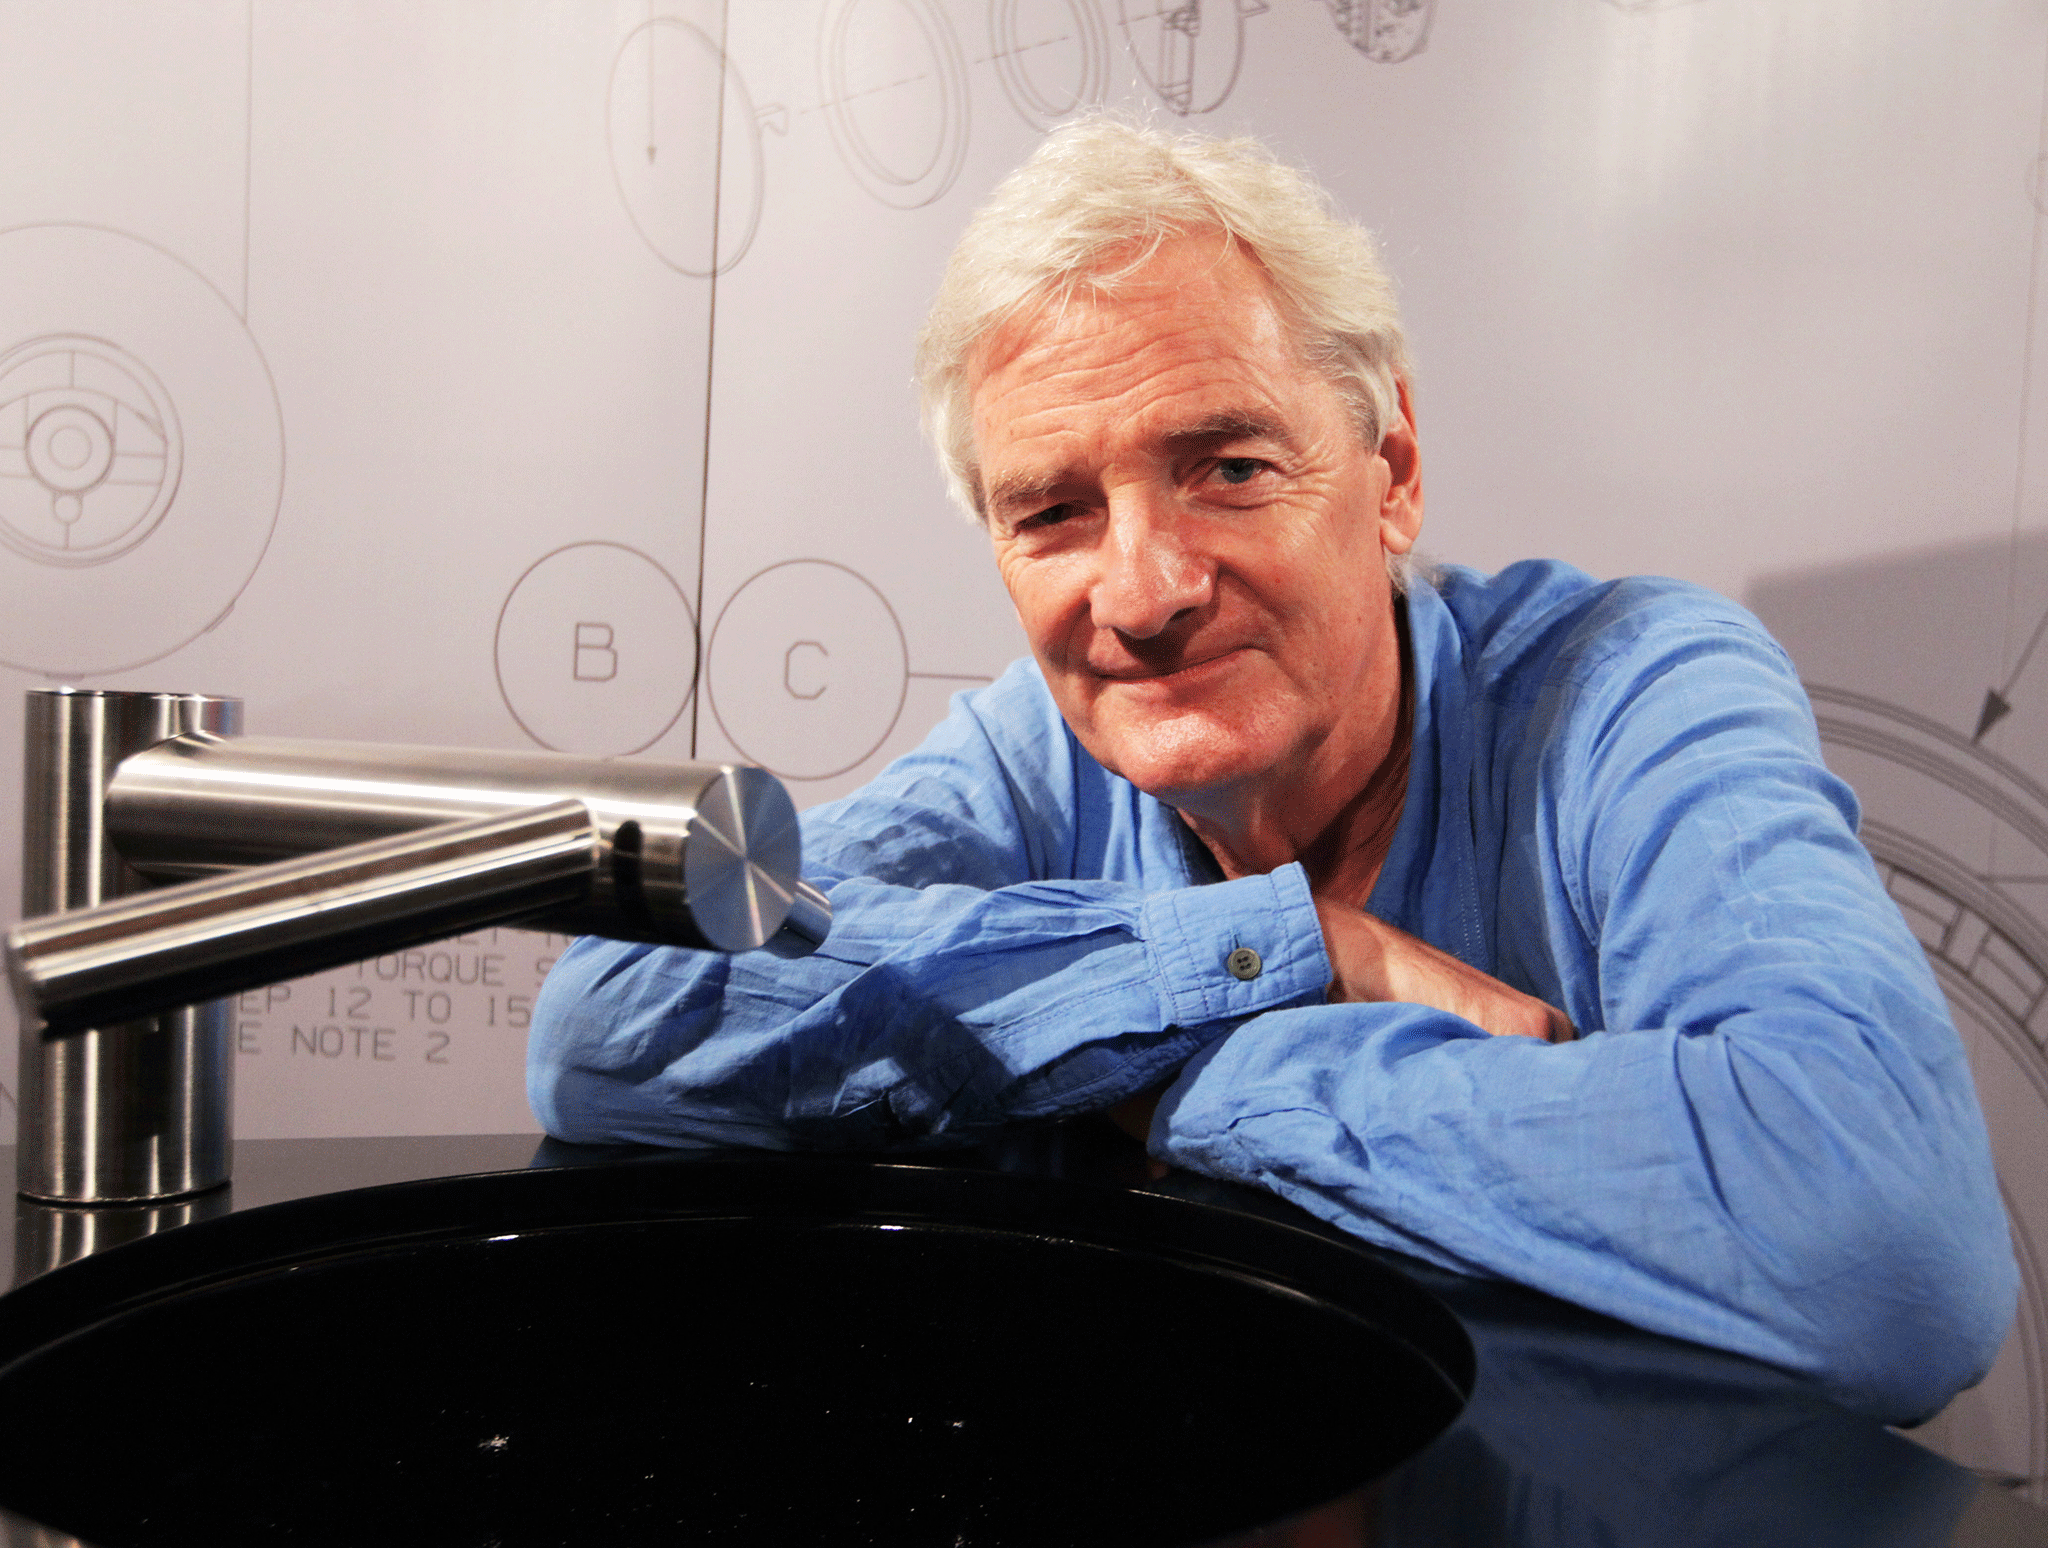 Sir James Dyson's farming business was the biggest private recipient of EU basic payments in the UK in 2016, receiving £1.6 million, Greenpeace said